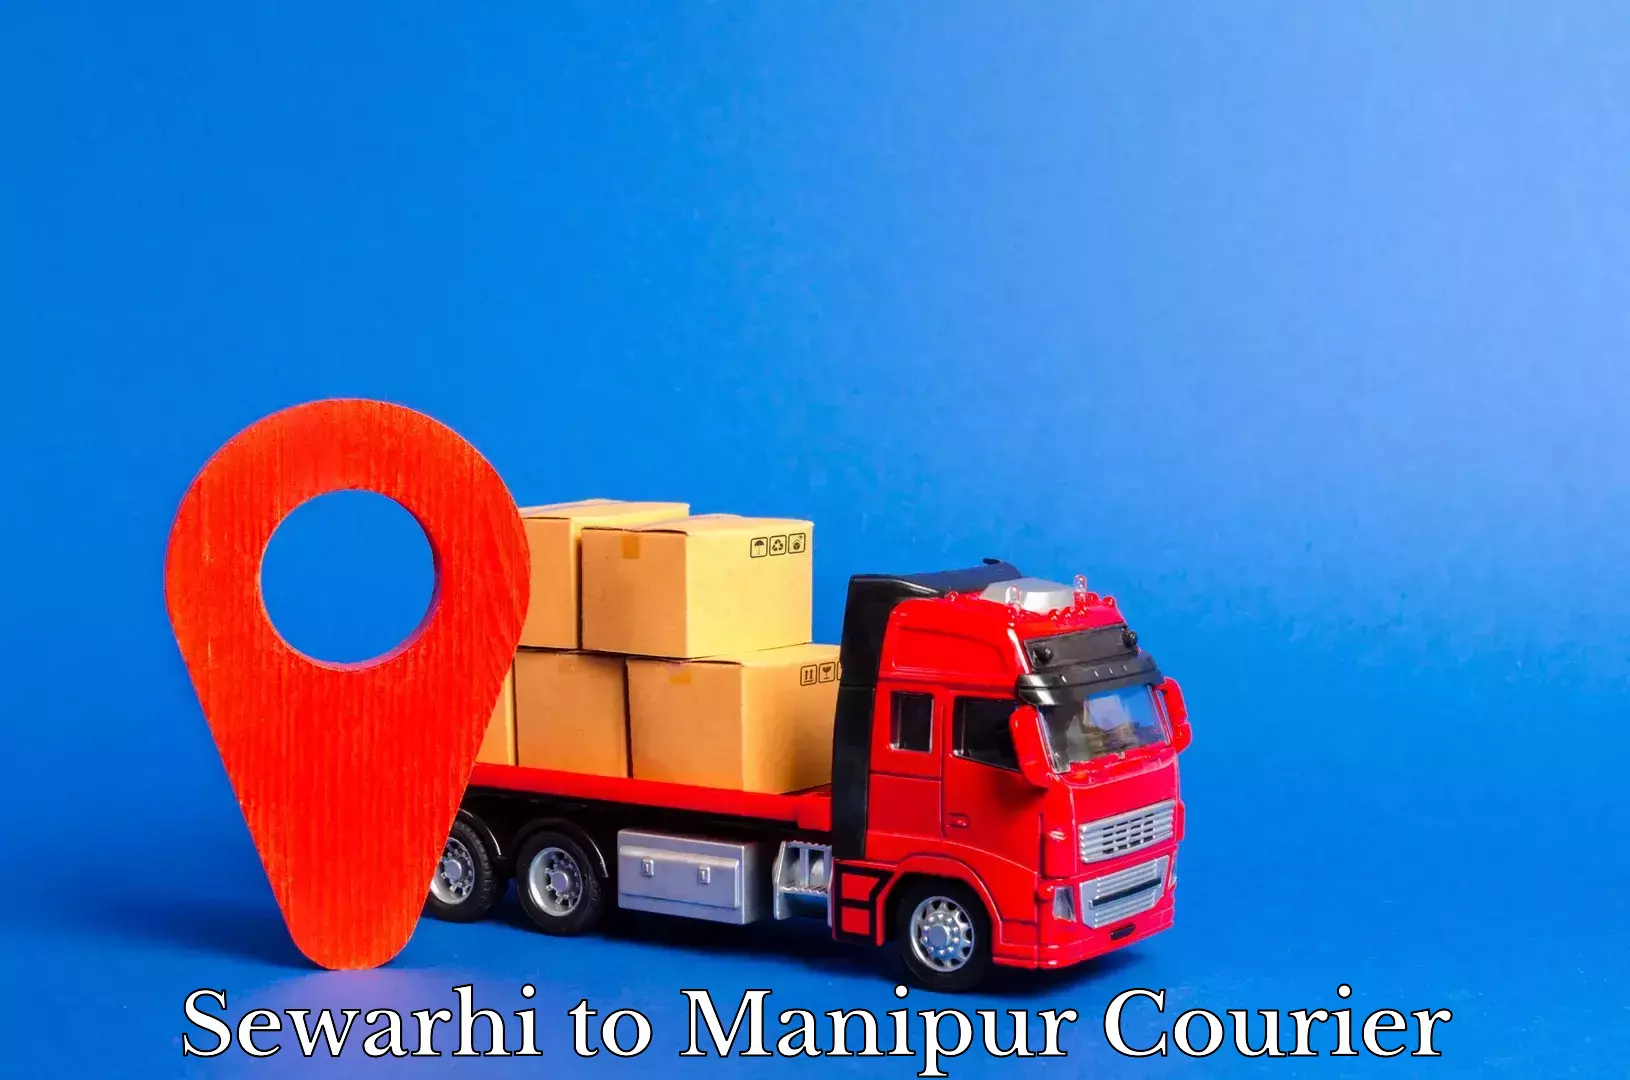 Courier service innovation Sewarhi to Manipur